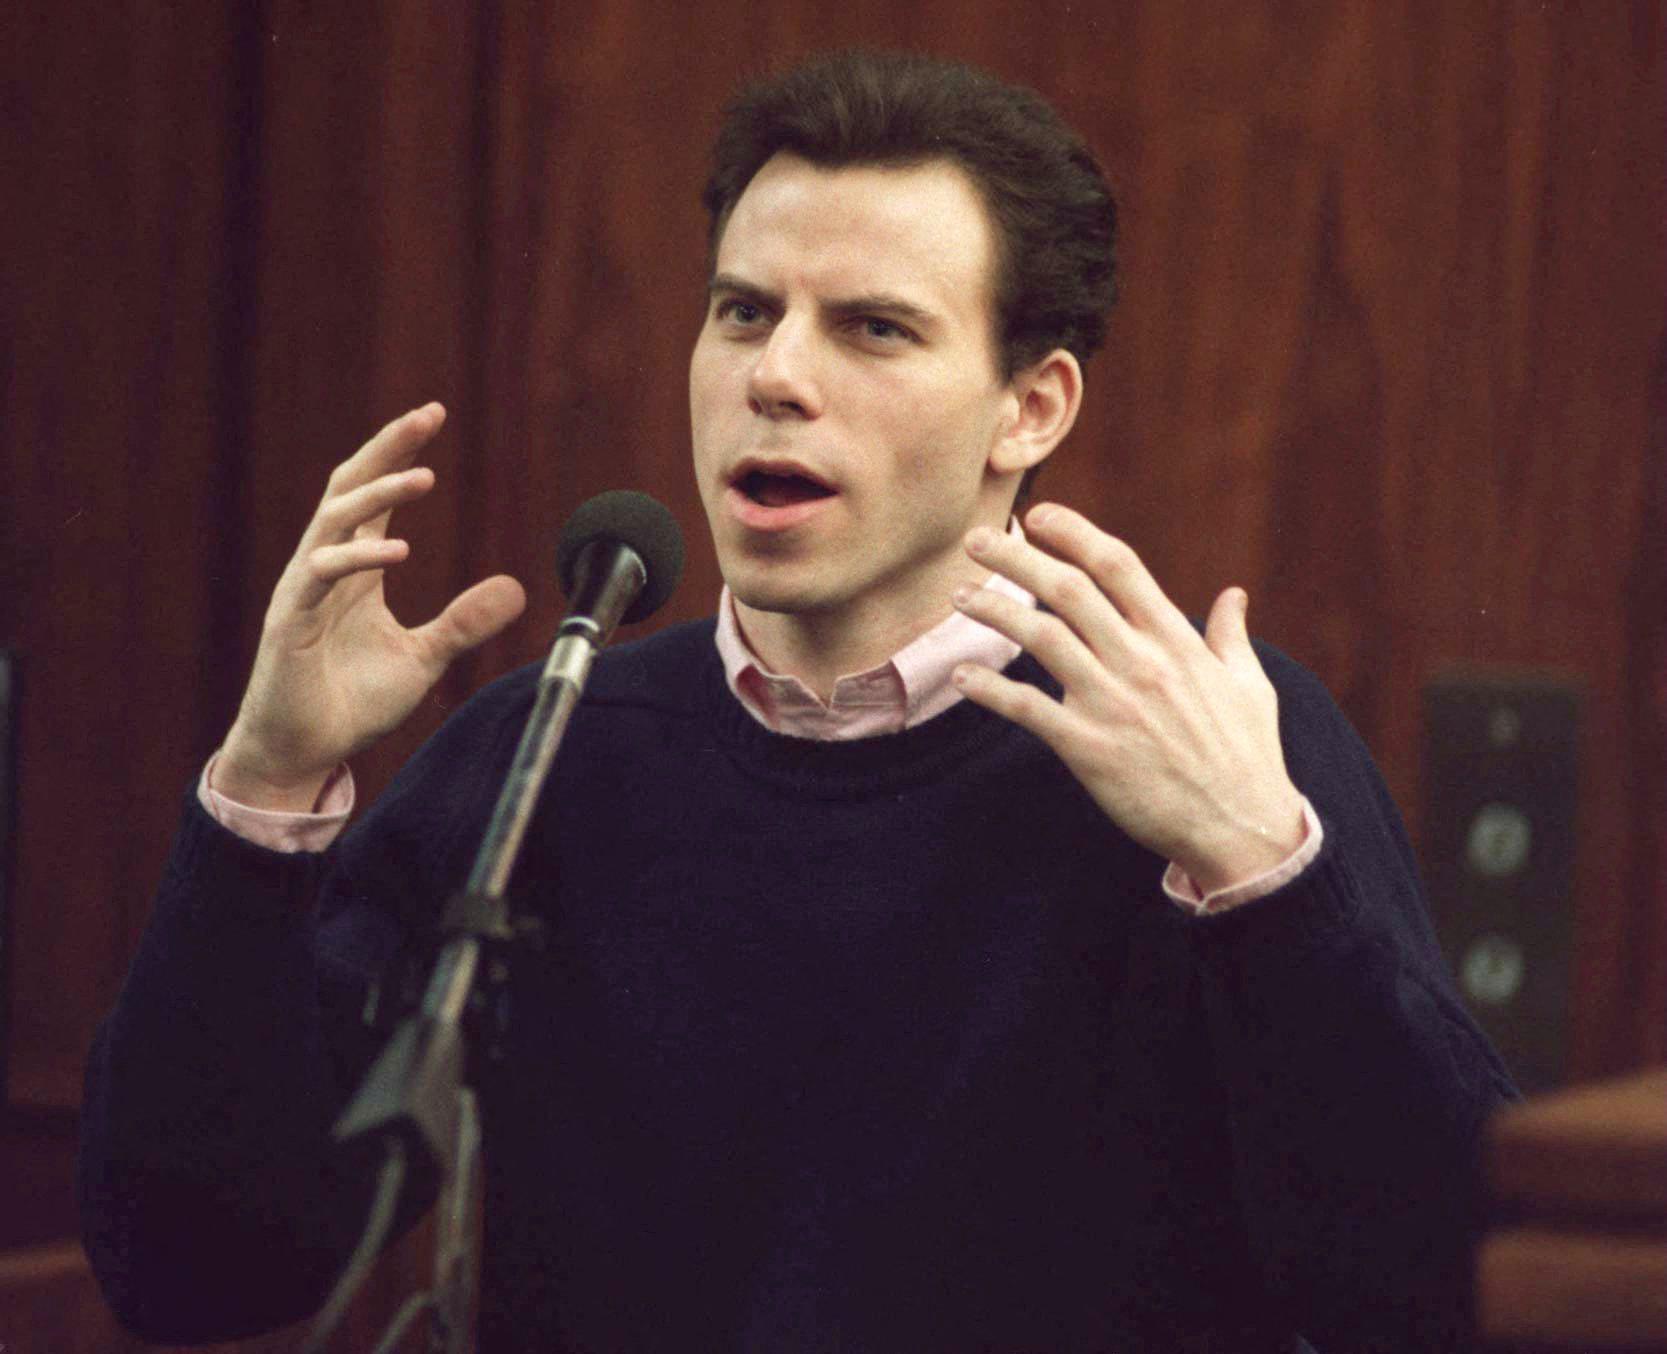 Fans Demand Justice For The Menendez Brothers Amid Gypsy Rose's Release